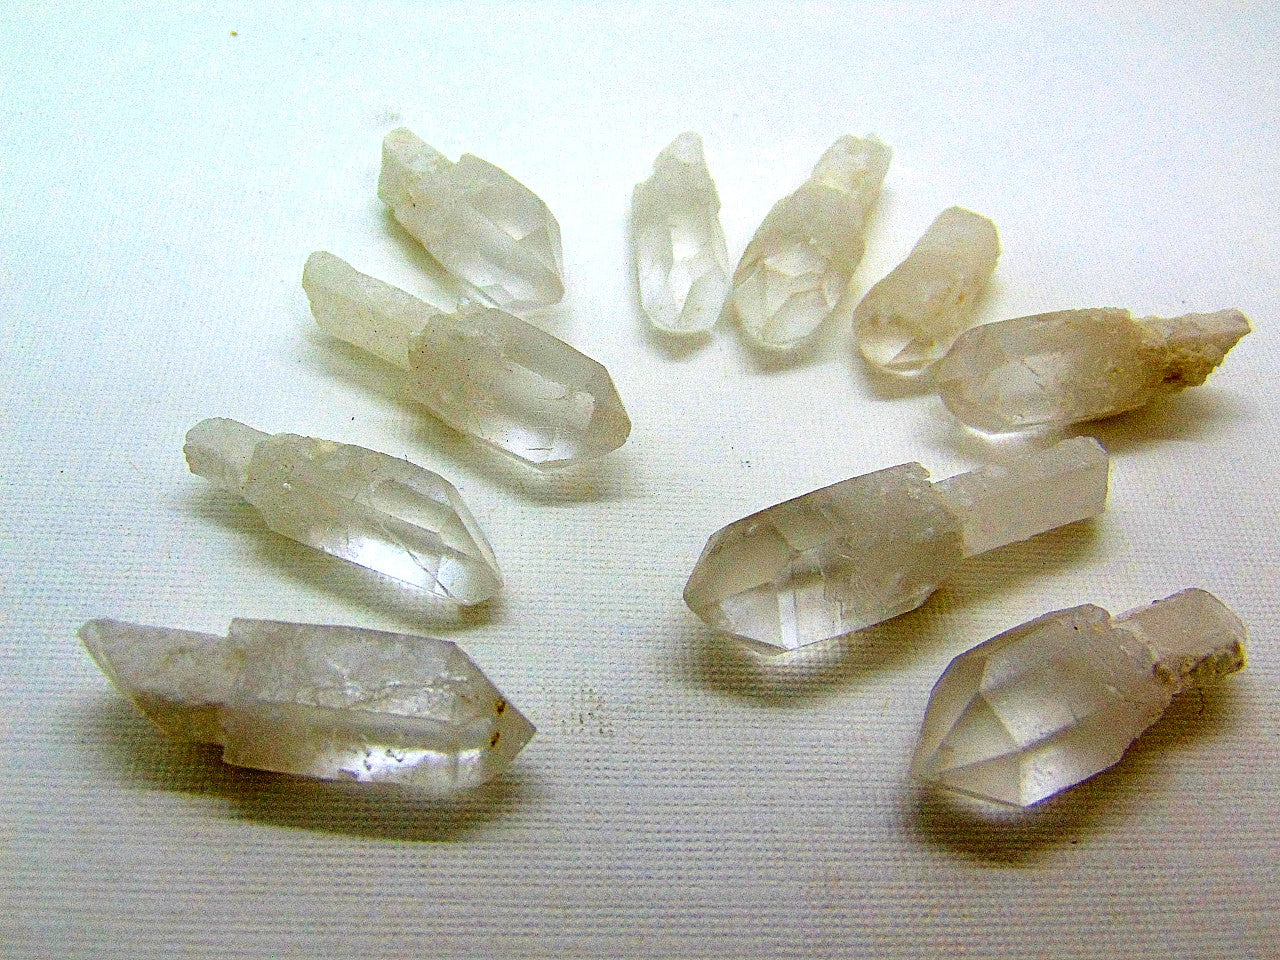 Scepter quartz crystals have a quartz crystal naturally grown and formed over the top of another older crystal. Legend says that these stones were used as a symbol of spiritual authority in Atlantis and Lemuria and that they have reemerged to bring crystal power to the present day.